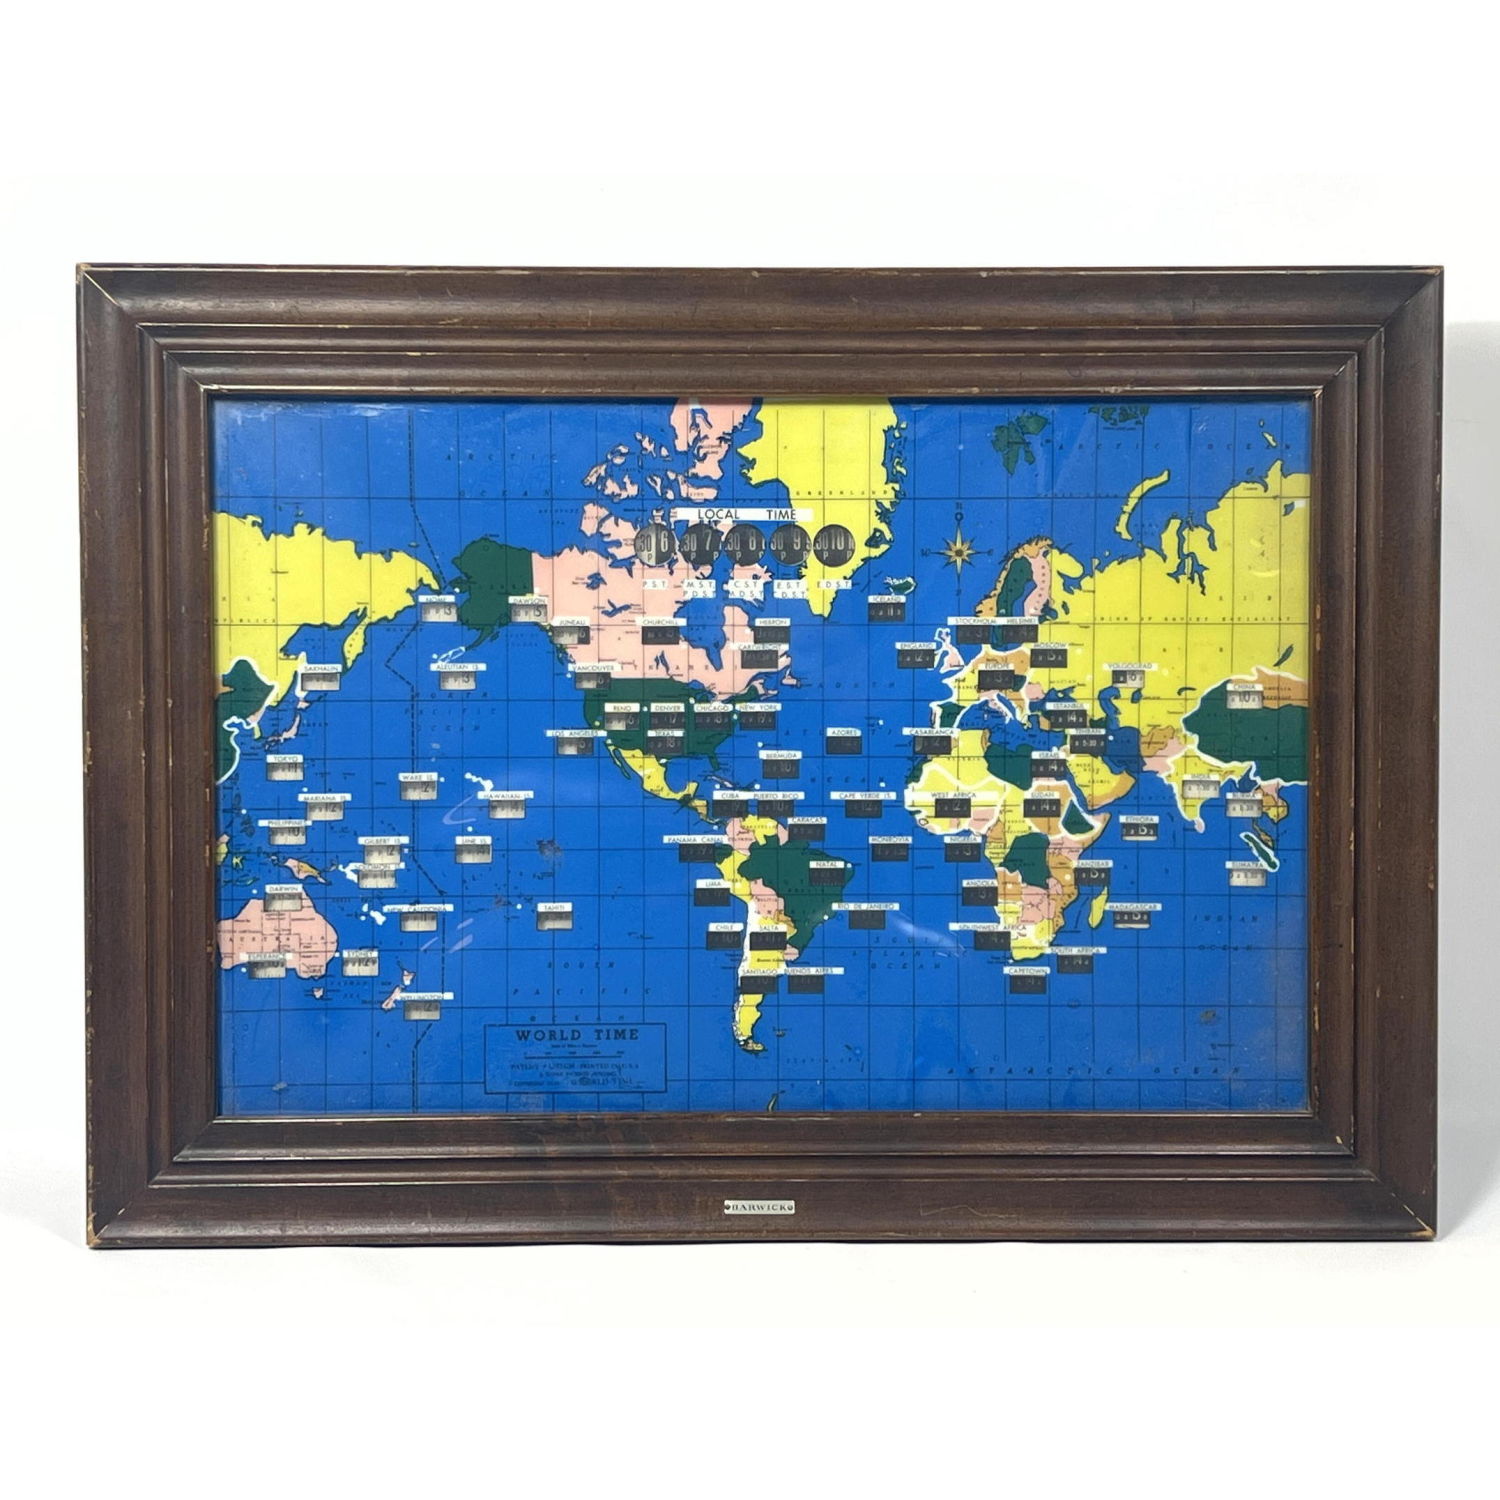 Howard Miller World Map time clock 

Dimensions: